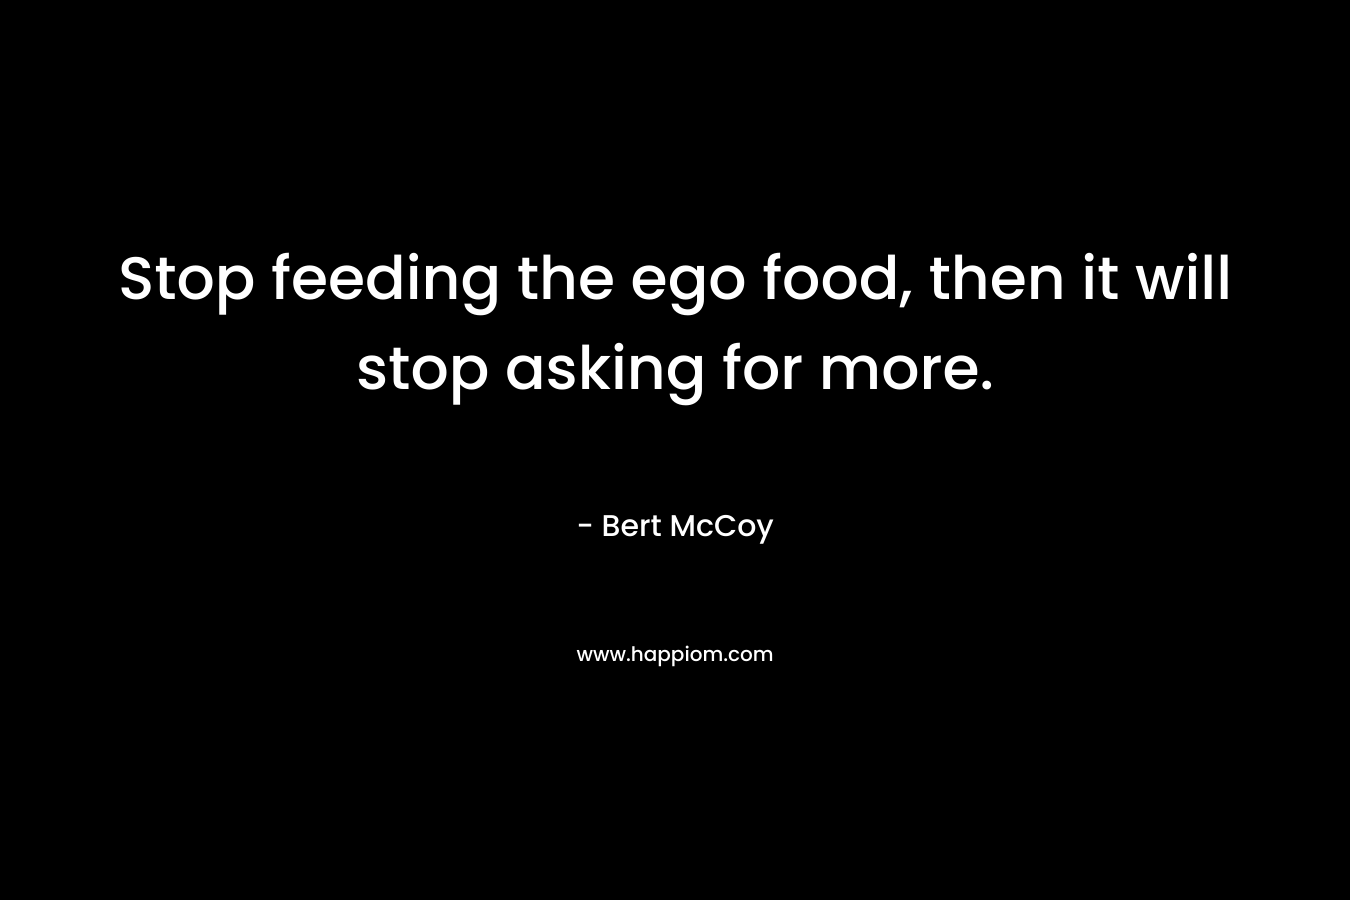 Stop feeding the ego food, then it will stop asking for more. – Bert McCoy